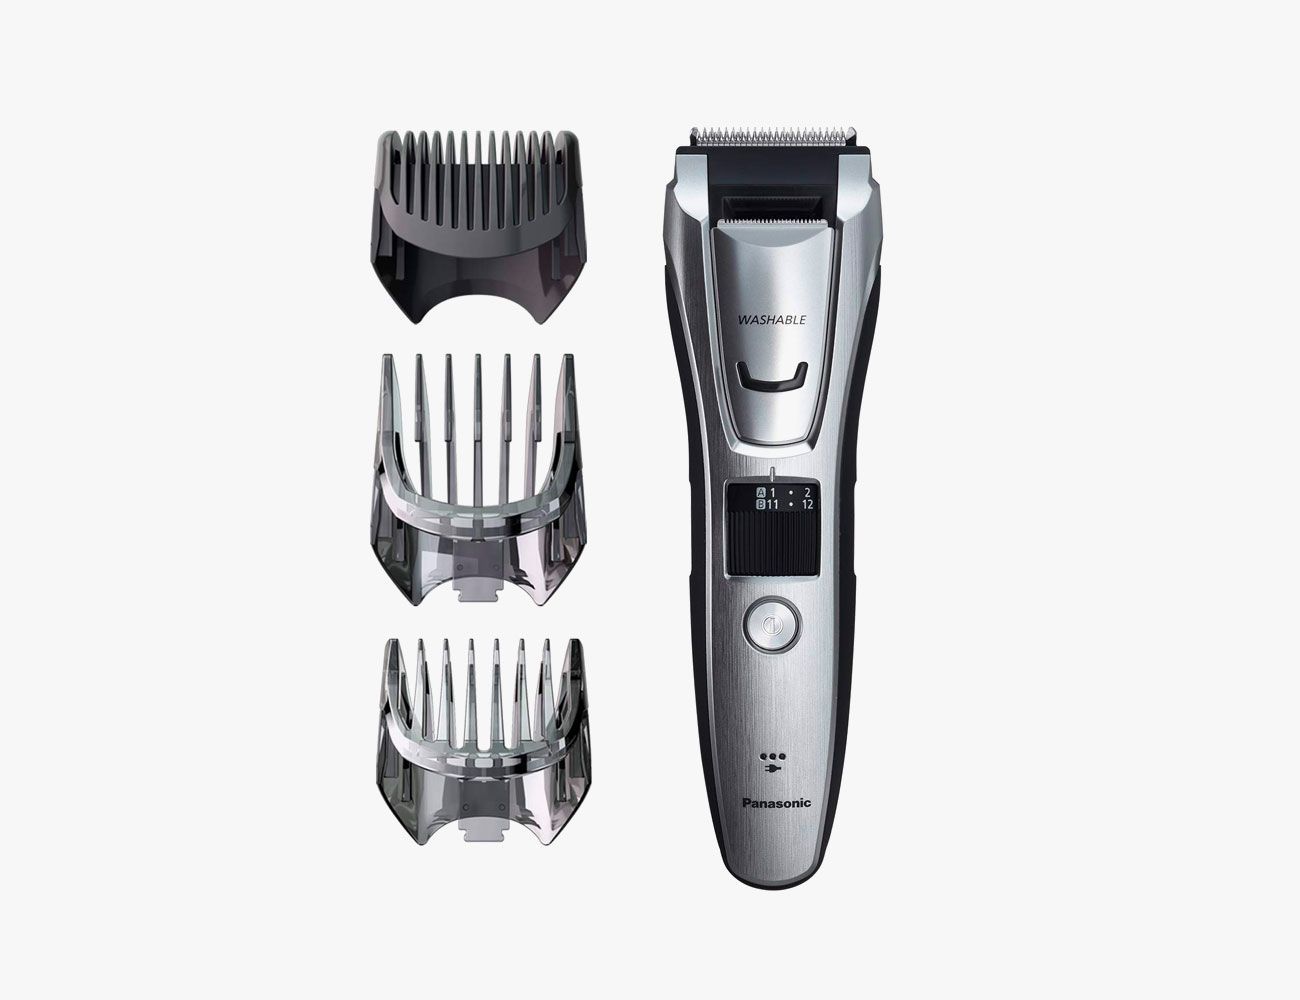 The Best Beard Trimmers for Fine-Tuning Your Facial Hair